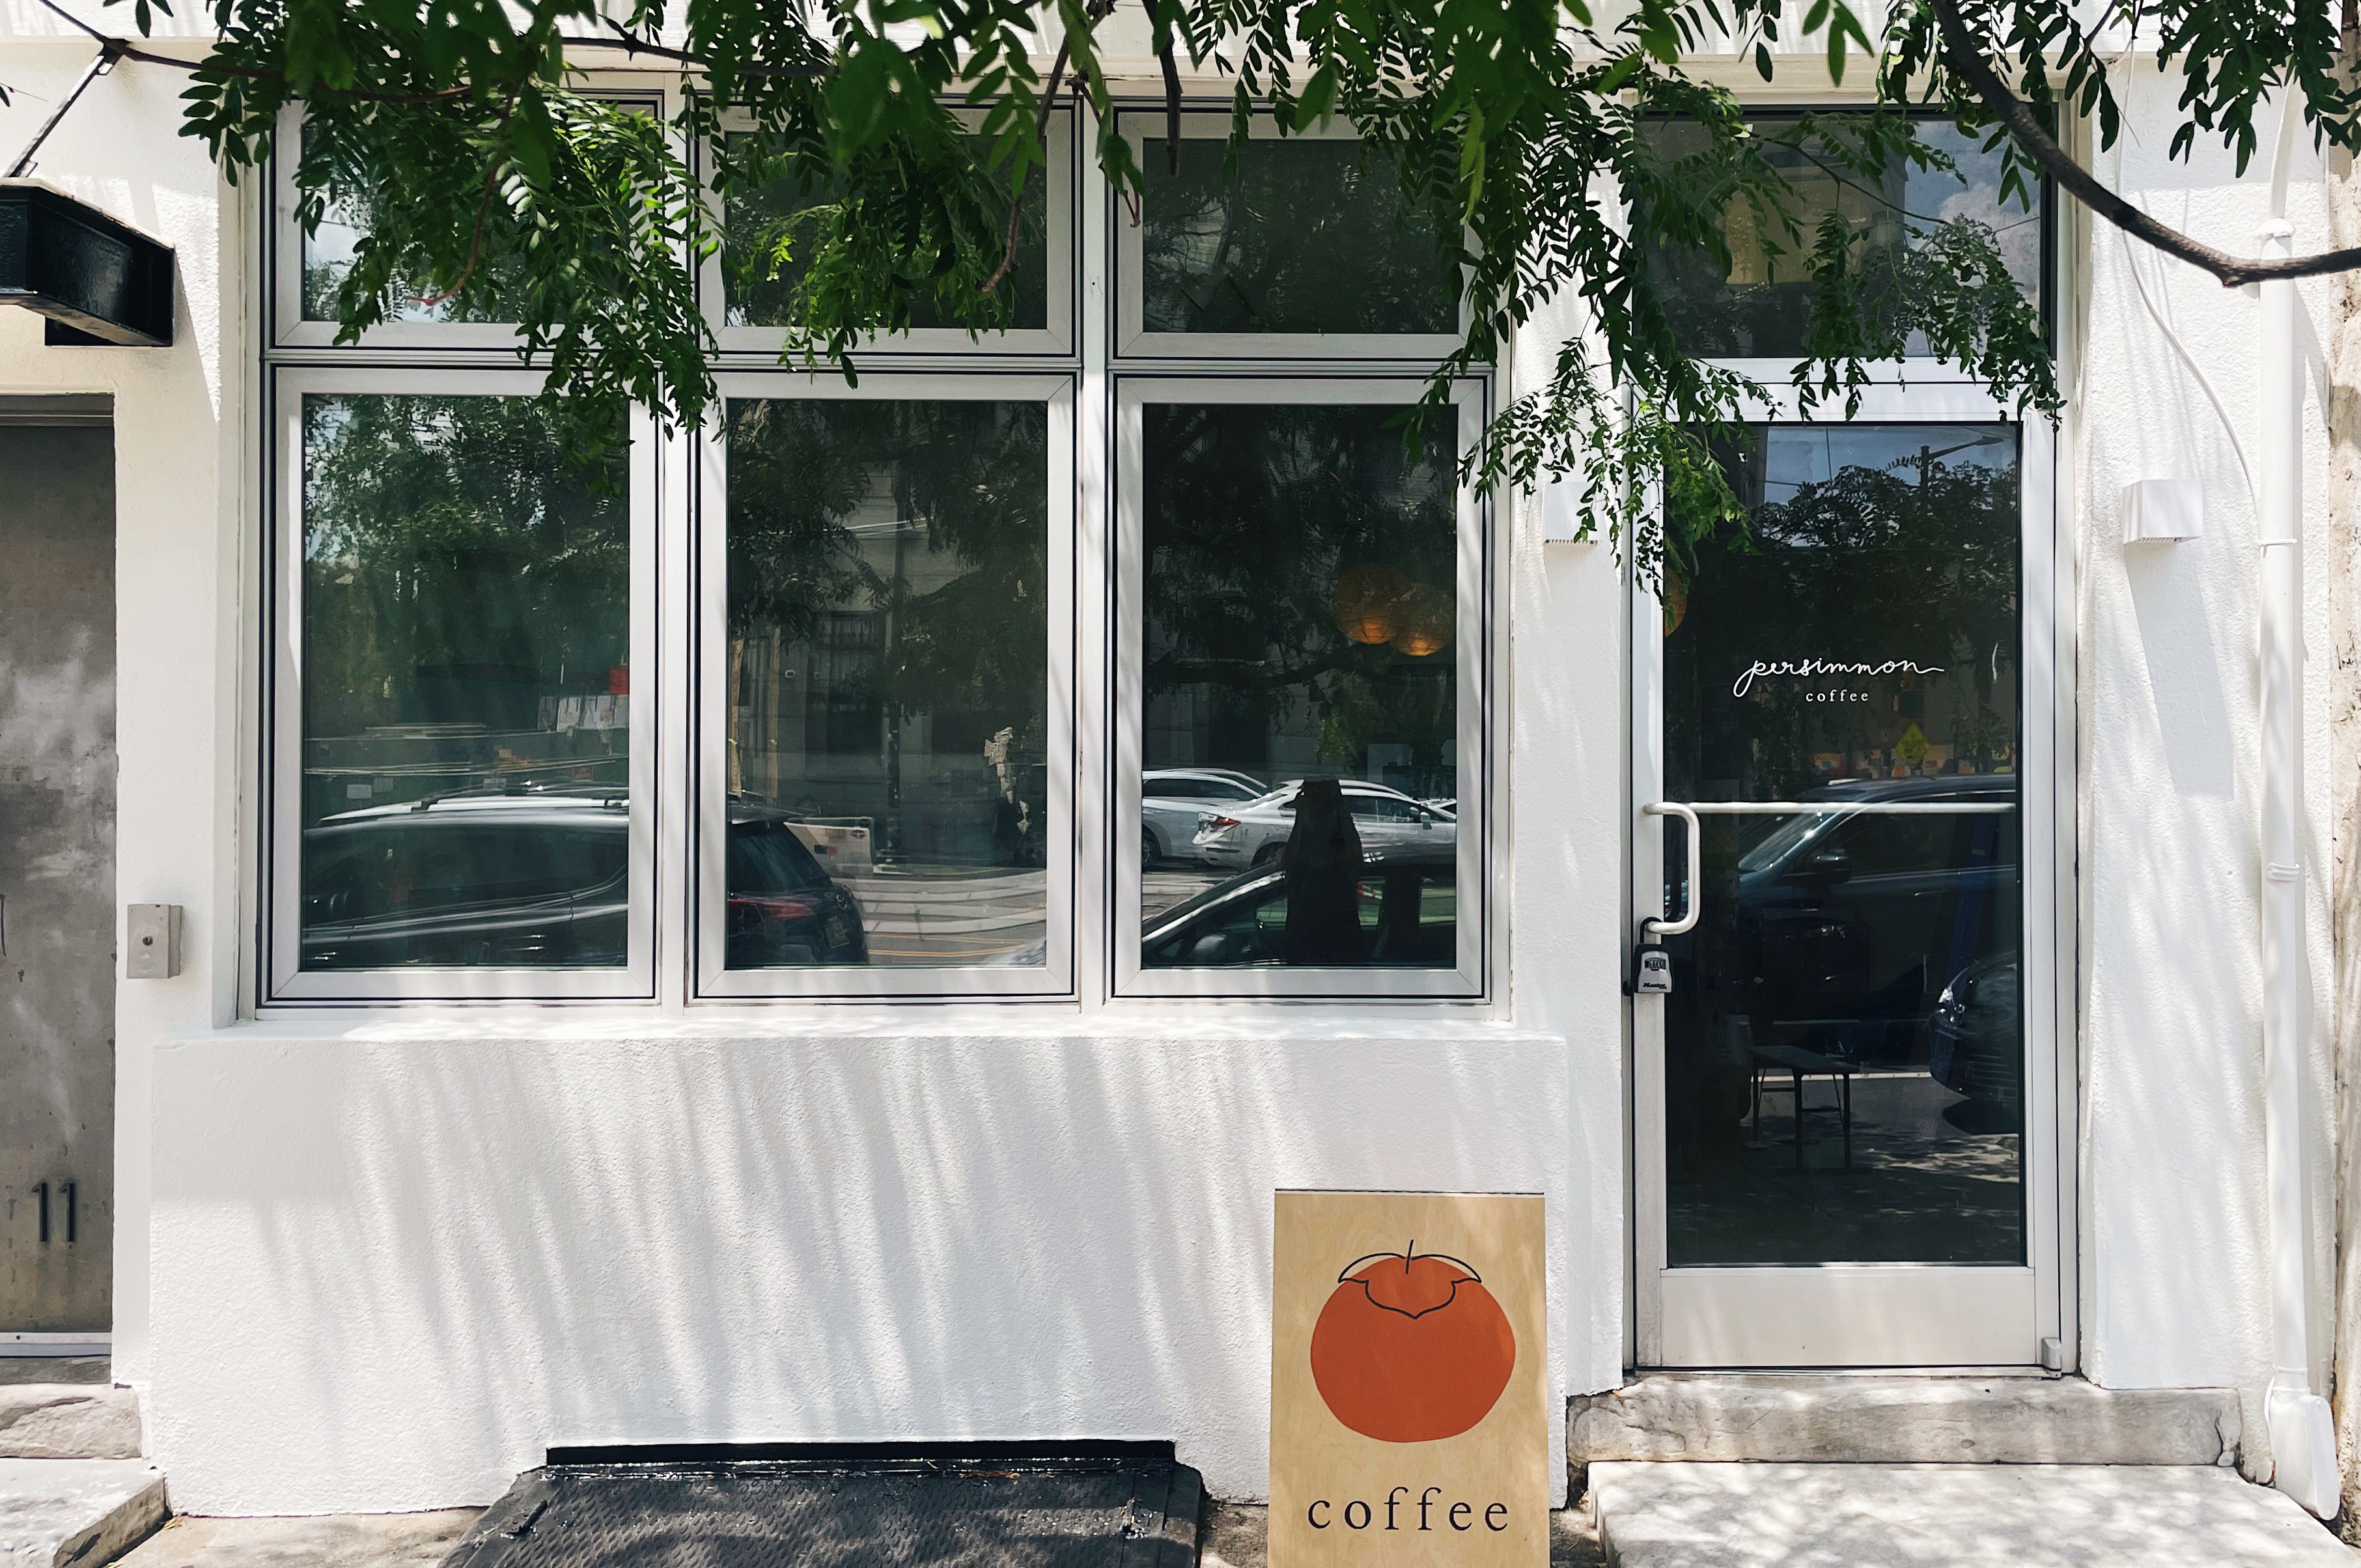 The outside of a shop with a white facade with a green tree and a sandwich board with an orange persimmon that reads Coffee.